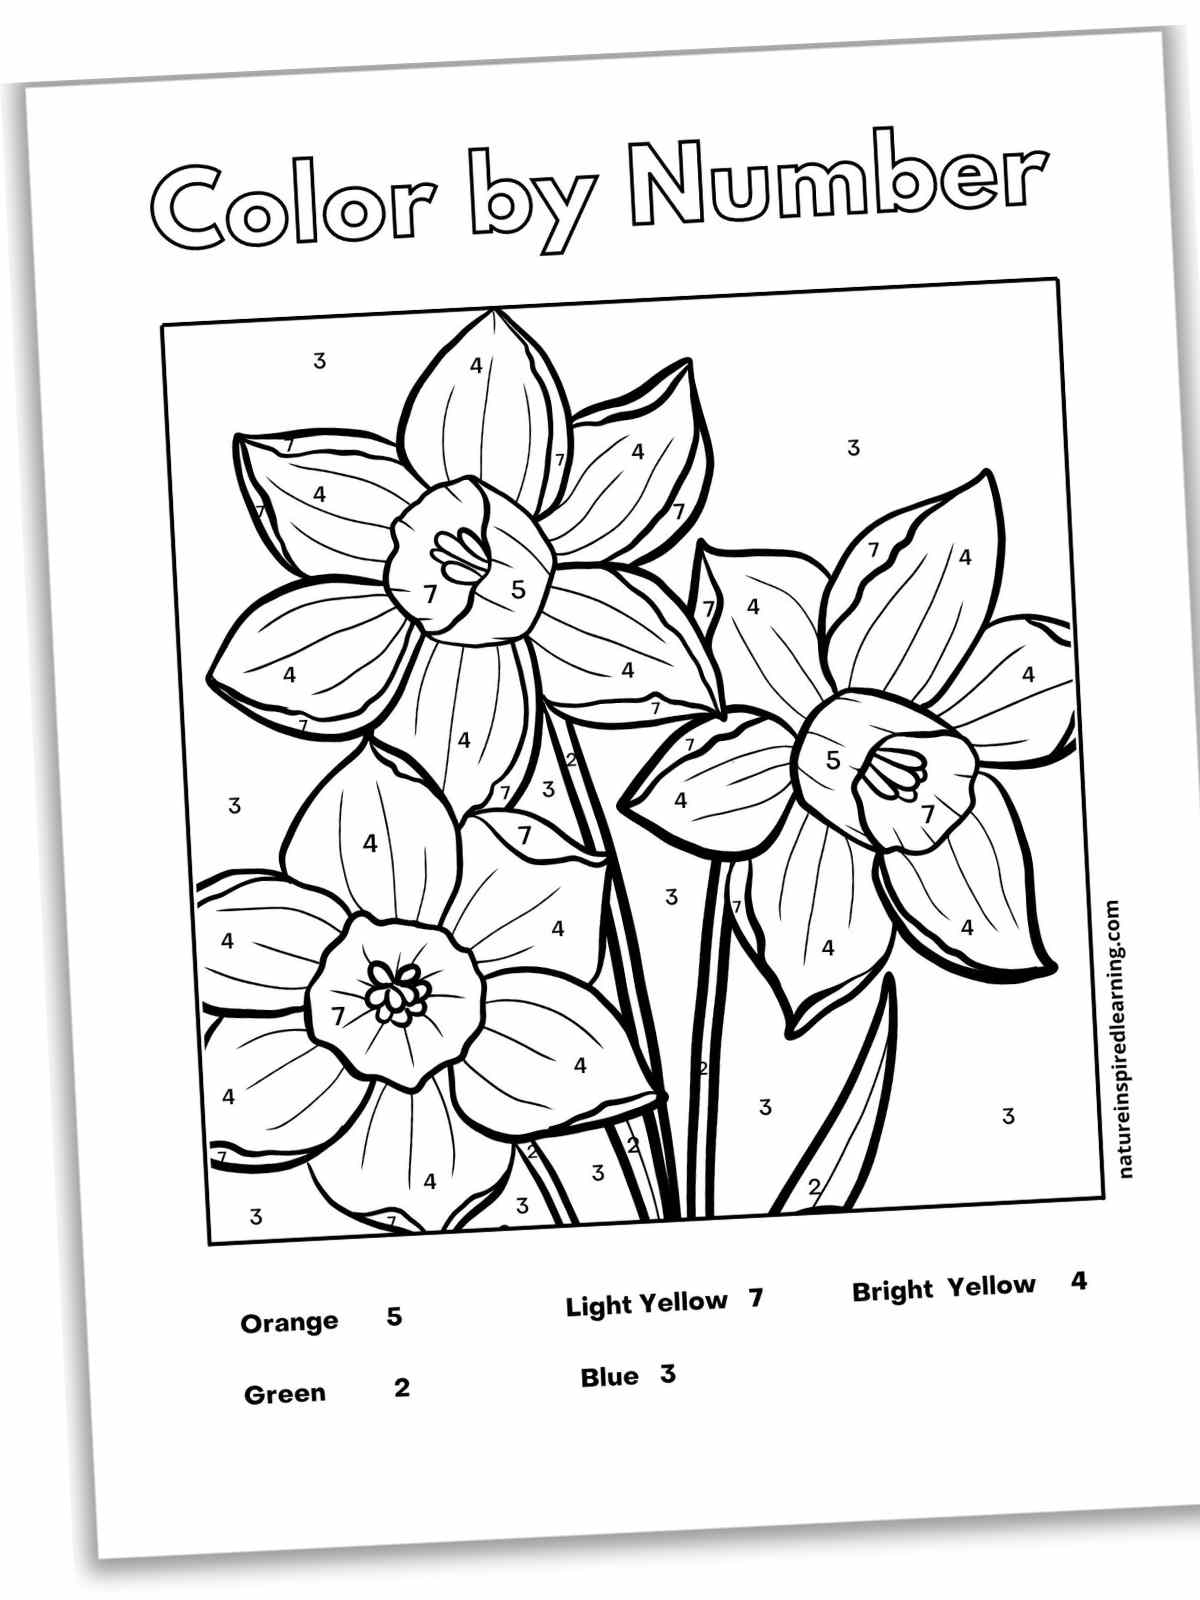 Black and white sheet with three daffodils with numbers on the petals, stems, and background with a color key at the bottom.